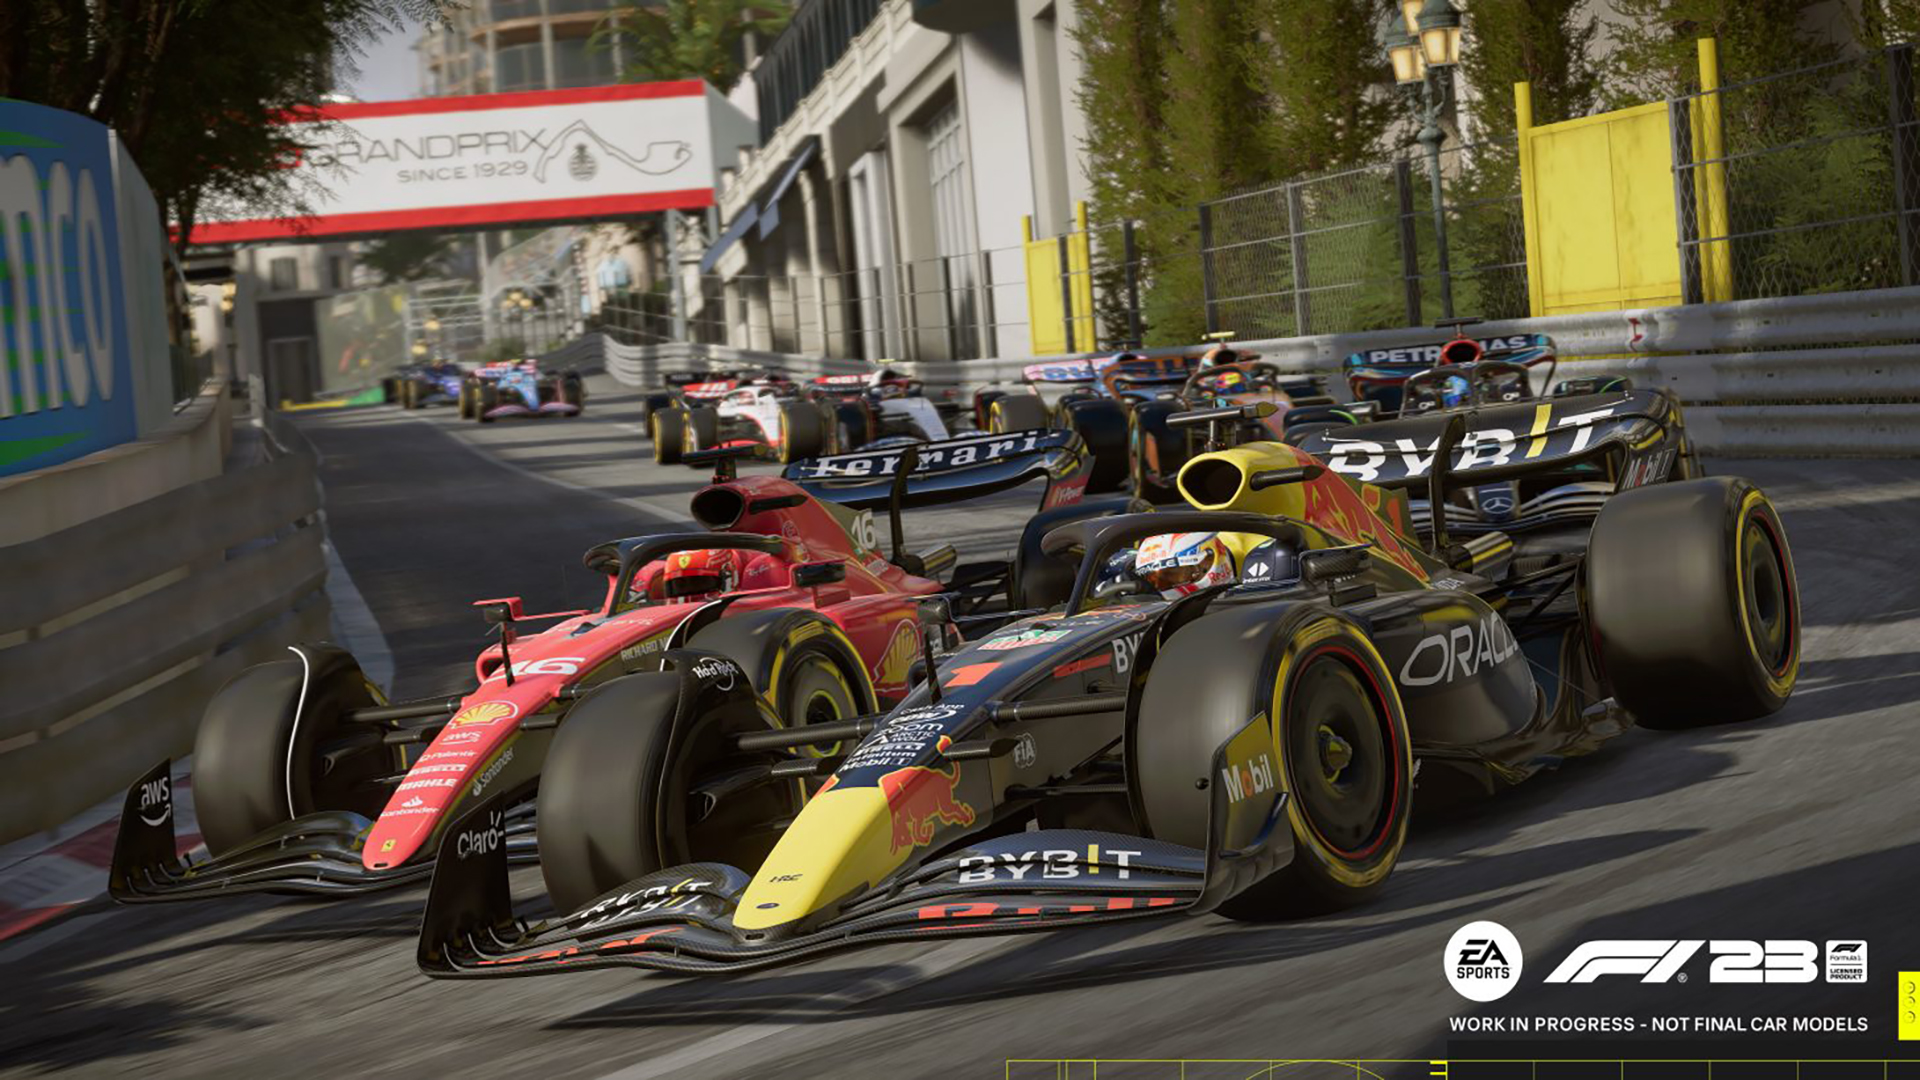 Race against Verstappen and Leclerc in new F1 23 game feature